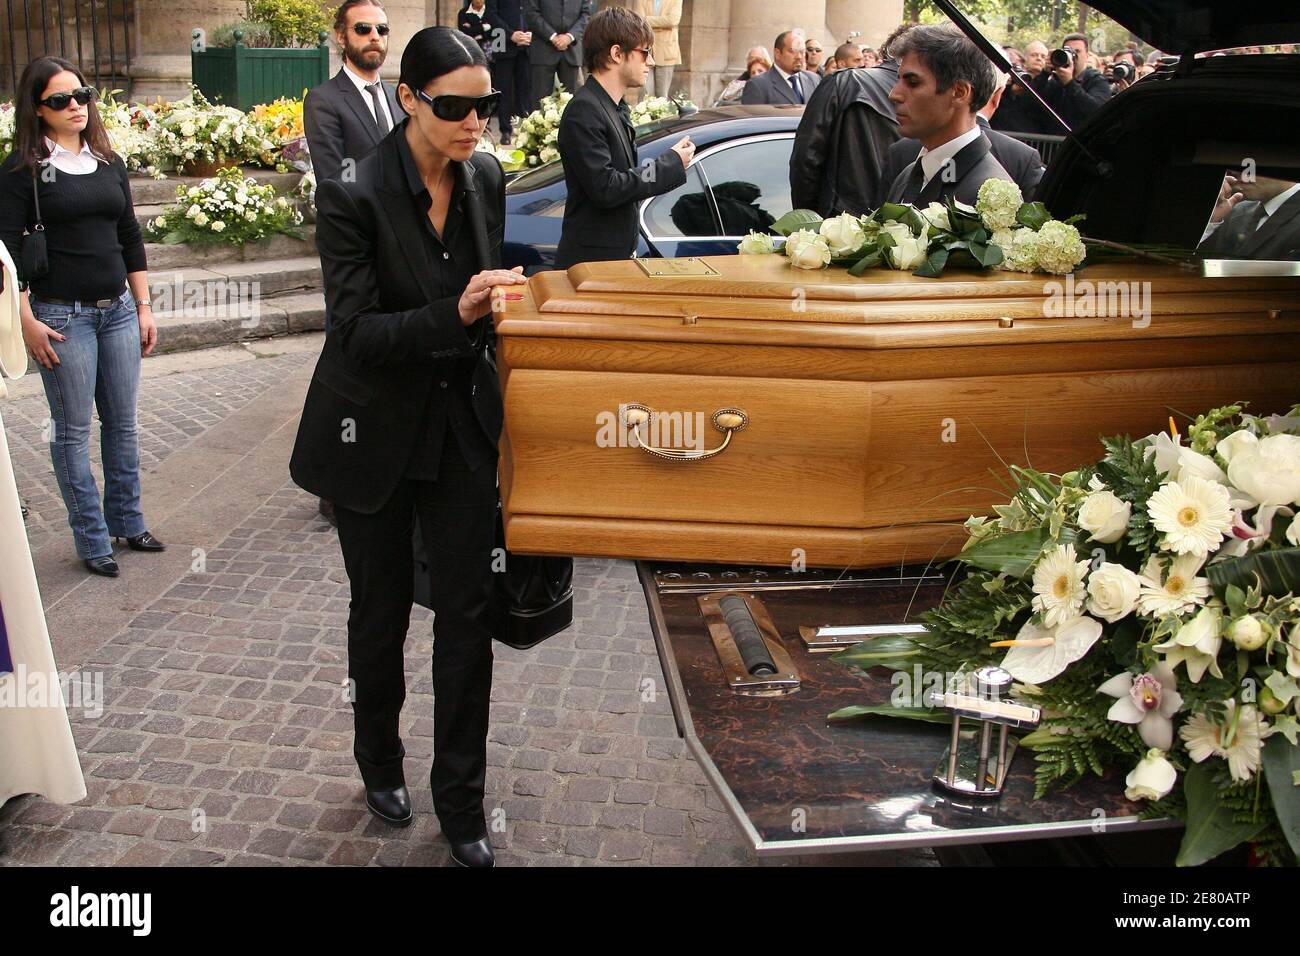 Monica Bellucci attends the funeral service for French actor Jean-Pierre  Cassel at Saint-Eustache church in Paris, France on April 26, 2007. Cassel  died of cancer at 74 last Thursday. Photo by Mousse-Nebinger/ABACAPRESS.COM